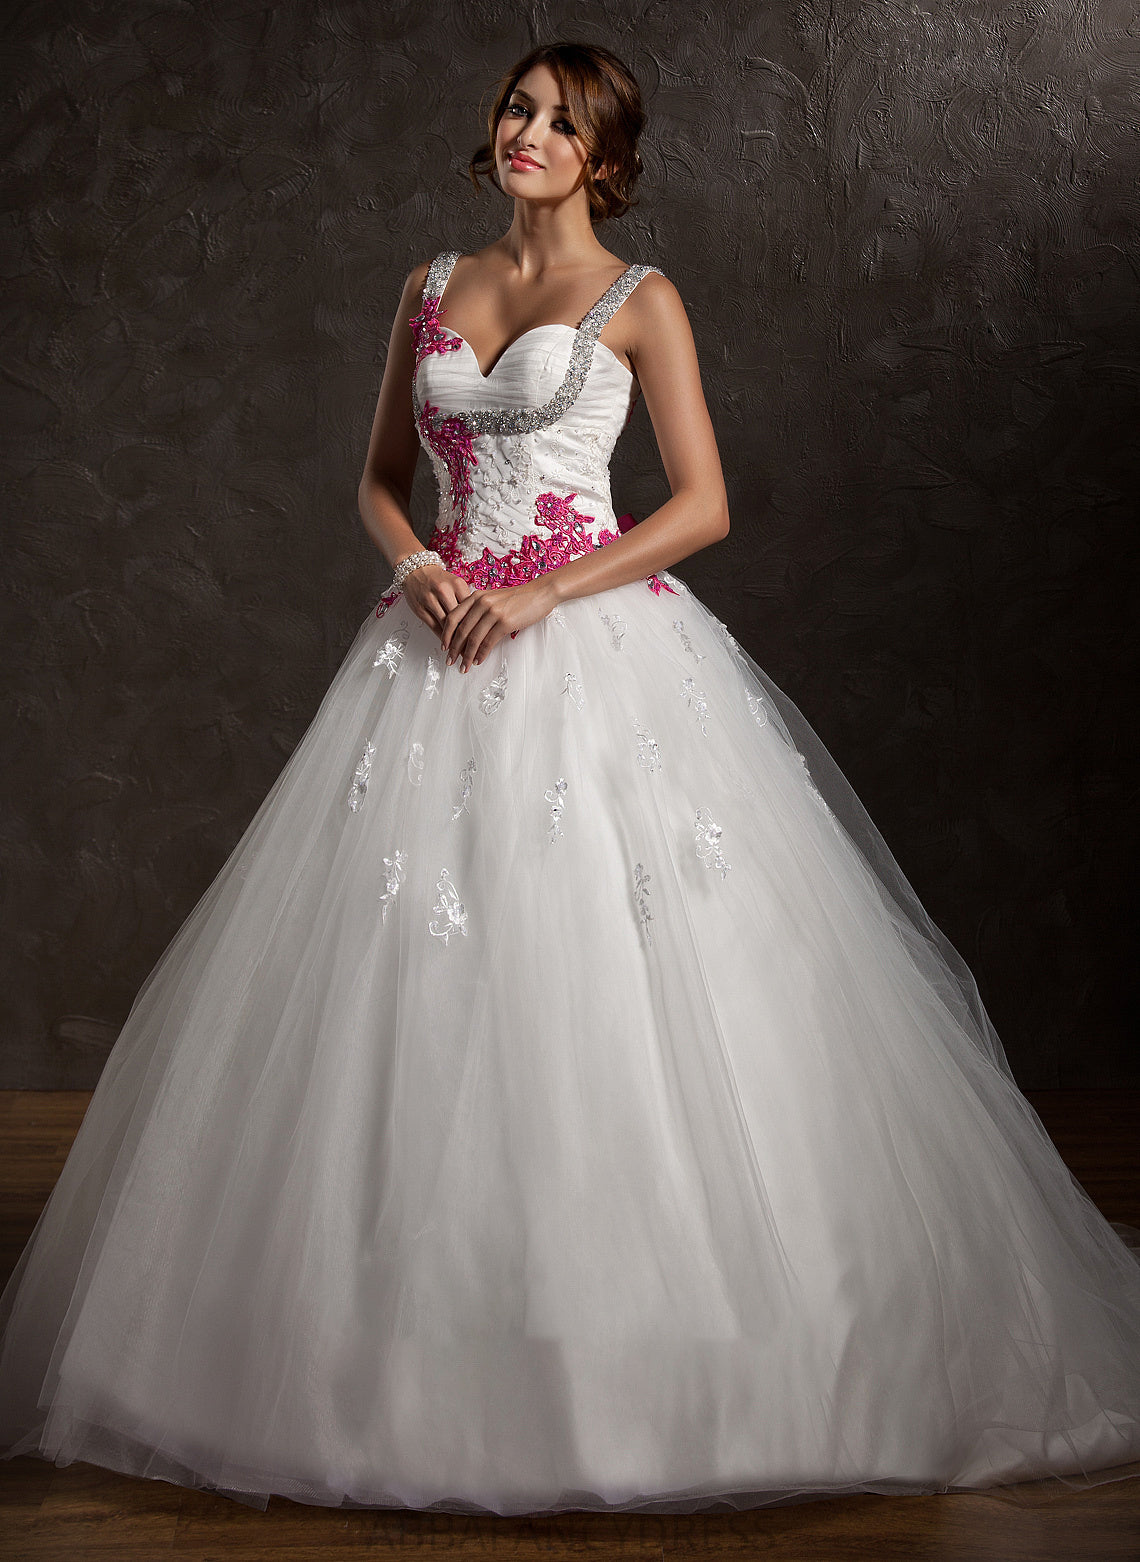 With Miah Dress Wedding Chapel Wedding Dresses Bow(s) Sweetheart Lace Appliques Train Ball-Gown/Princess Tulle Ruffle